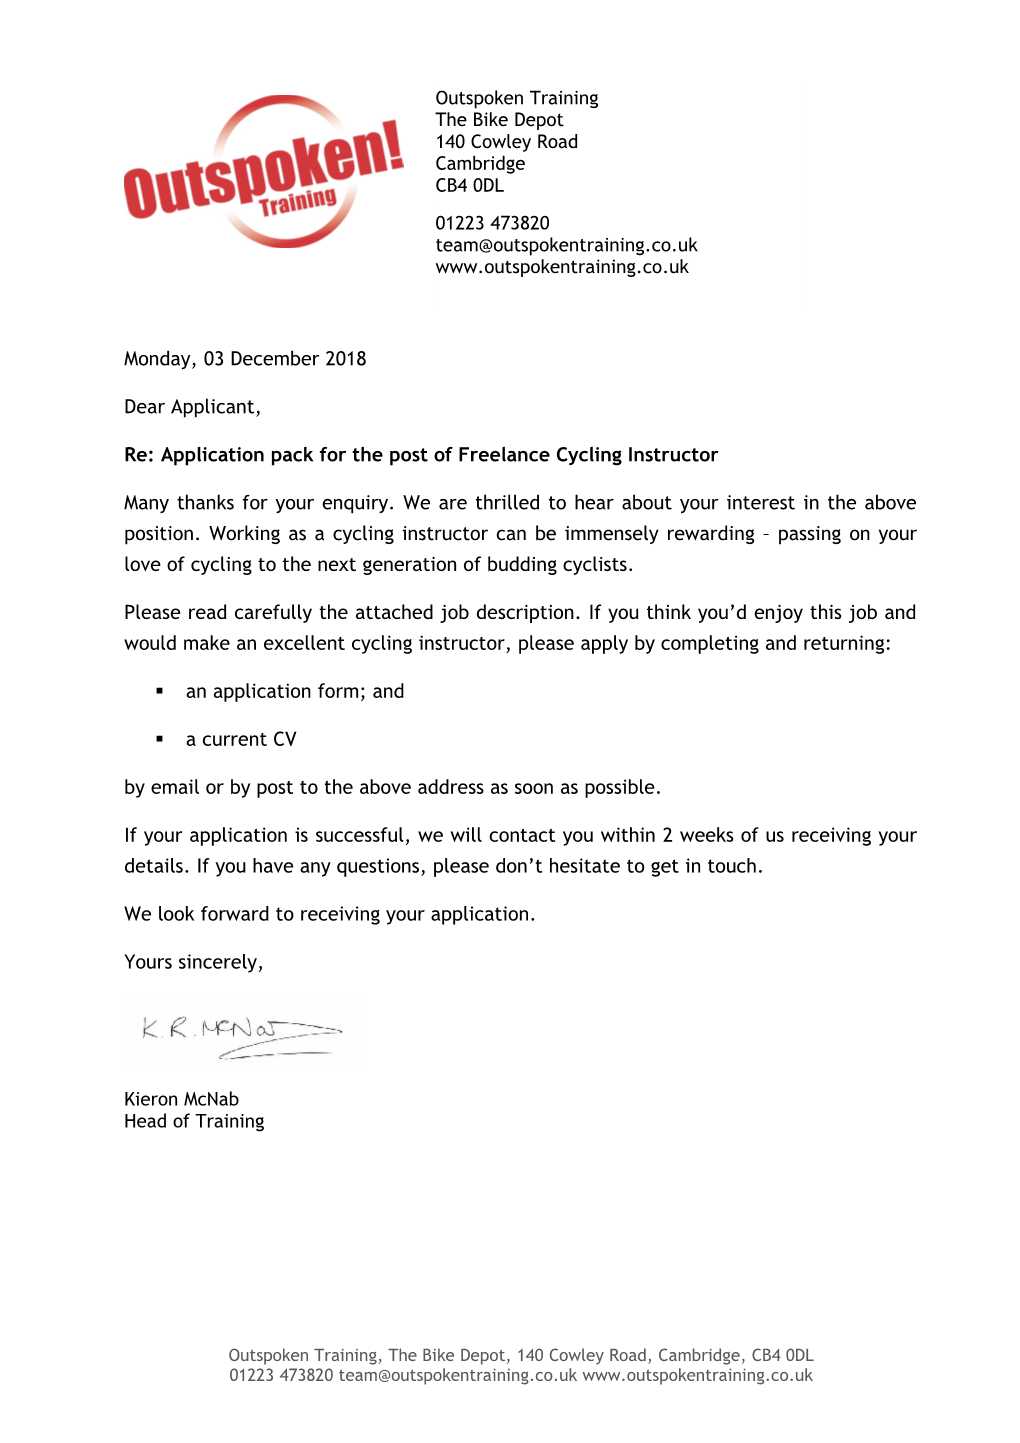 Re: Application Pack for the Post of Freelance Cycling Instructor